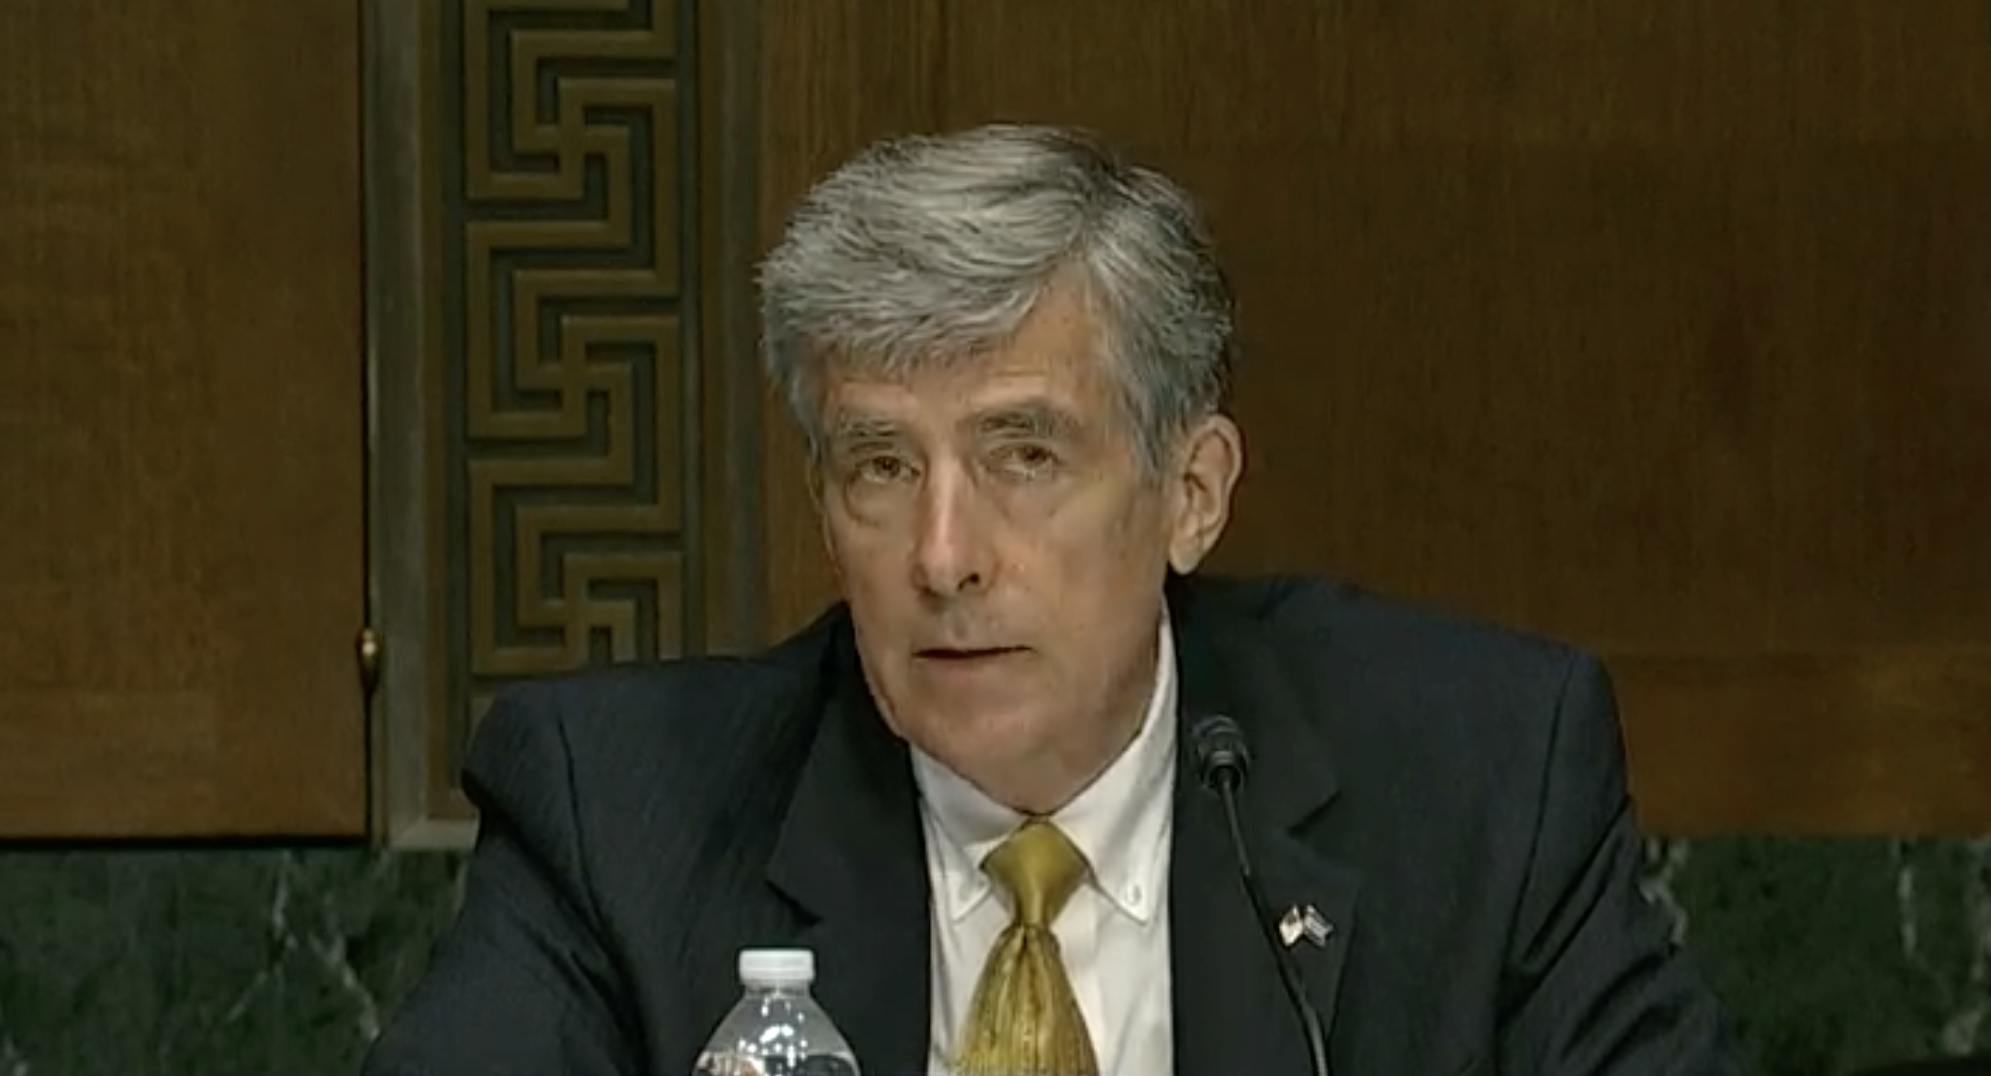 John "Chris" Inglis appears at an August 2020 U.S. Senate hearing on recommendations from the Cyberspace Solarium Commission.